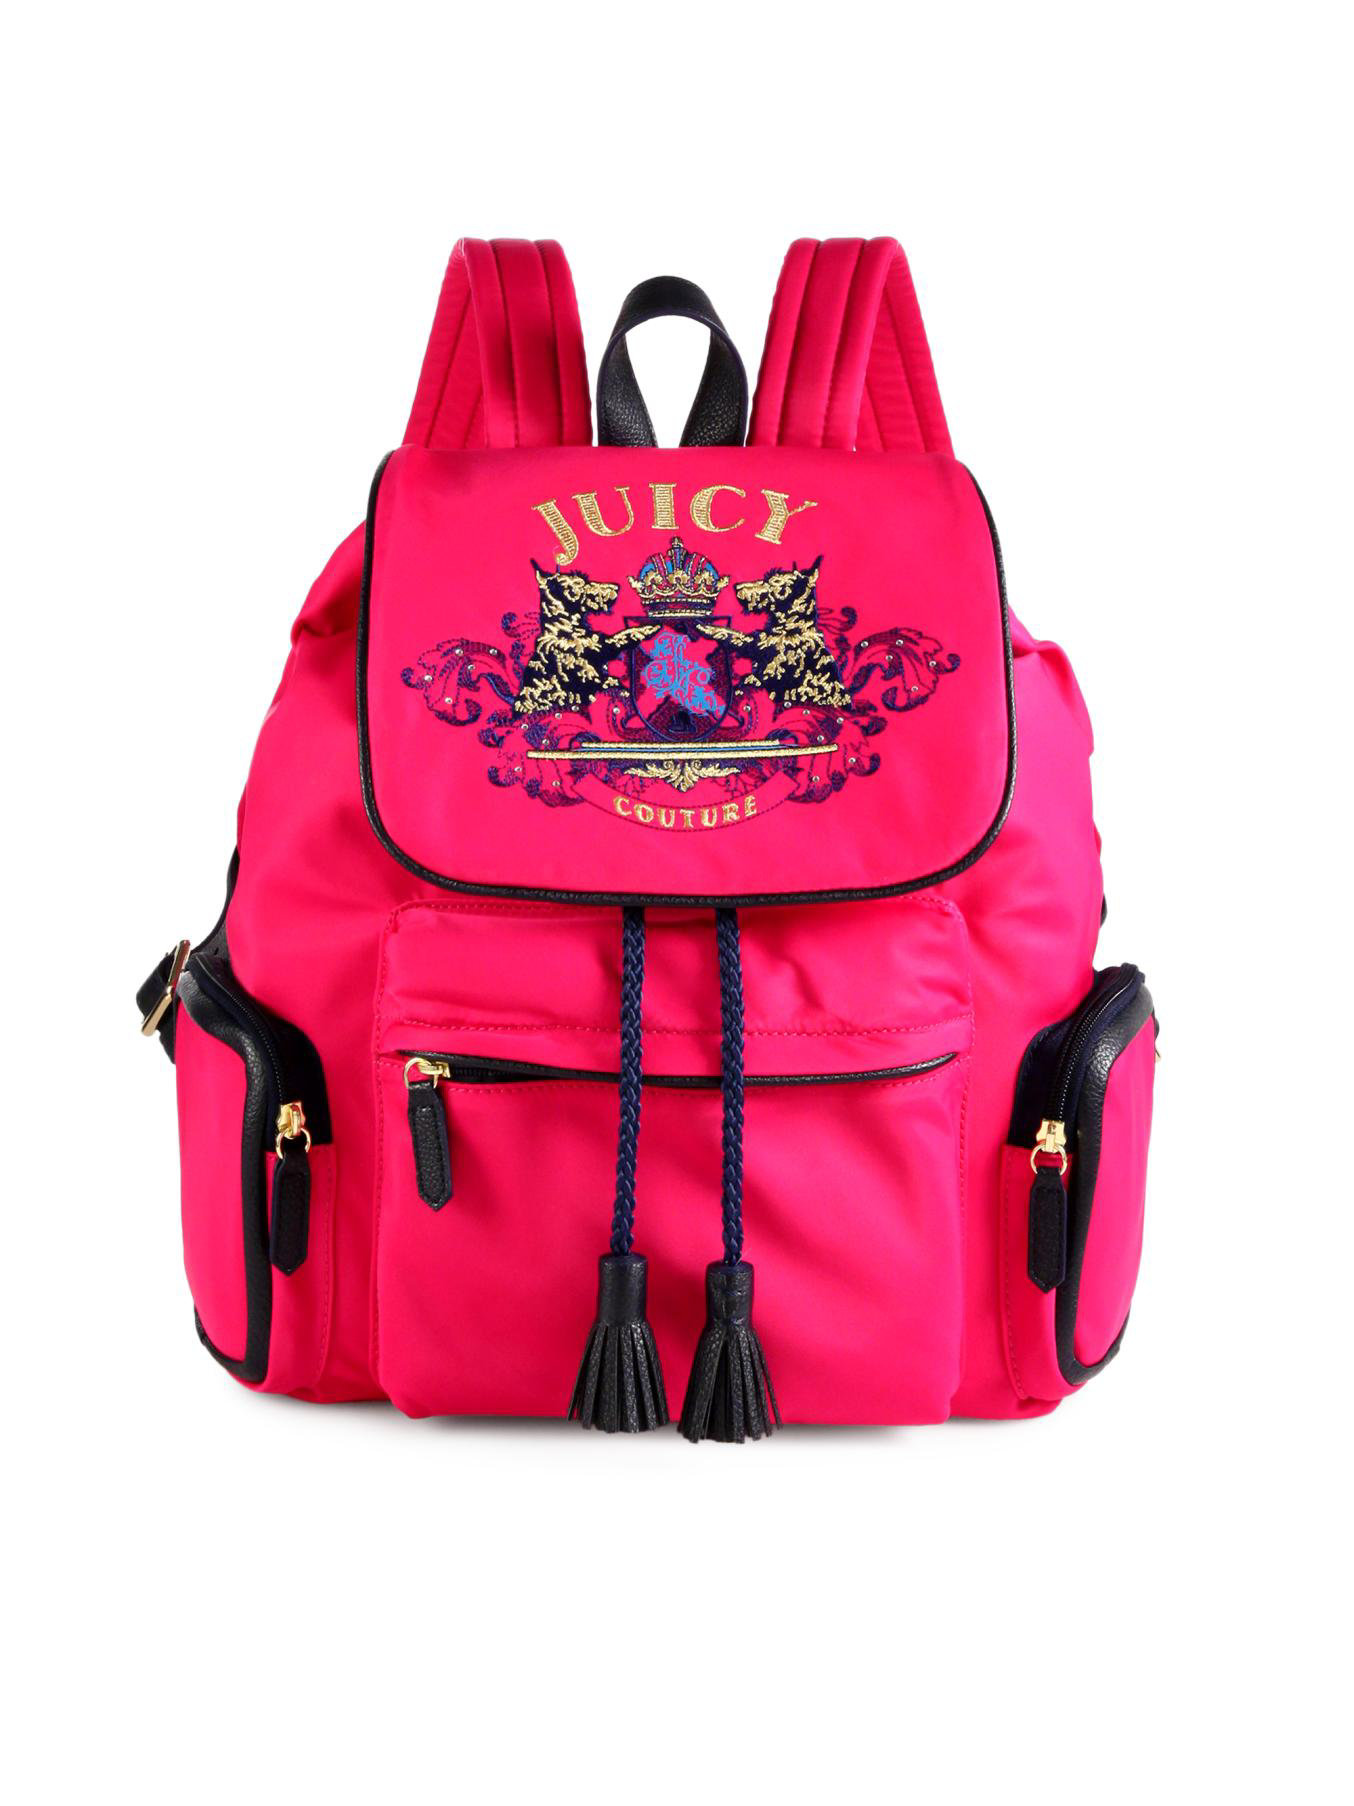 Lyst - Juicy Couture Girls Nylon Billie Backpack in Pink